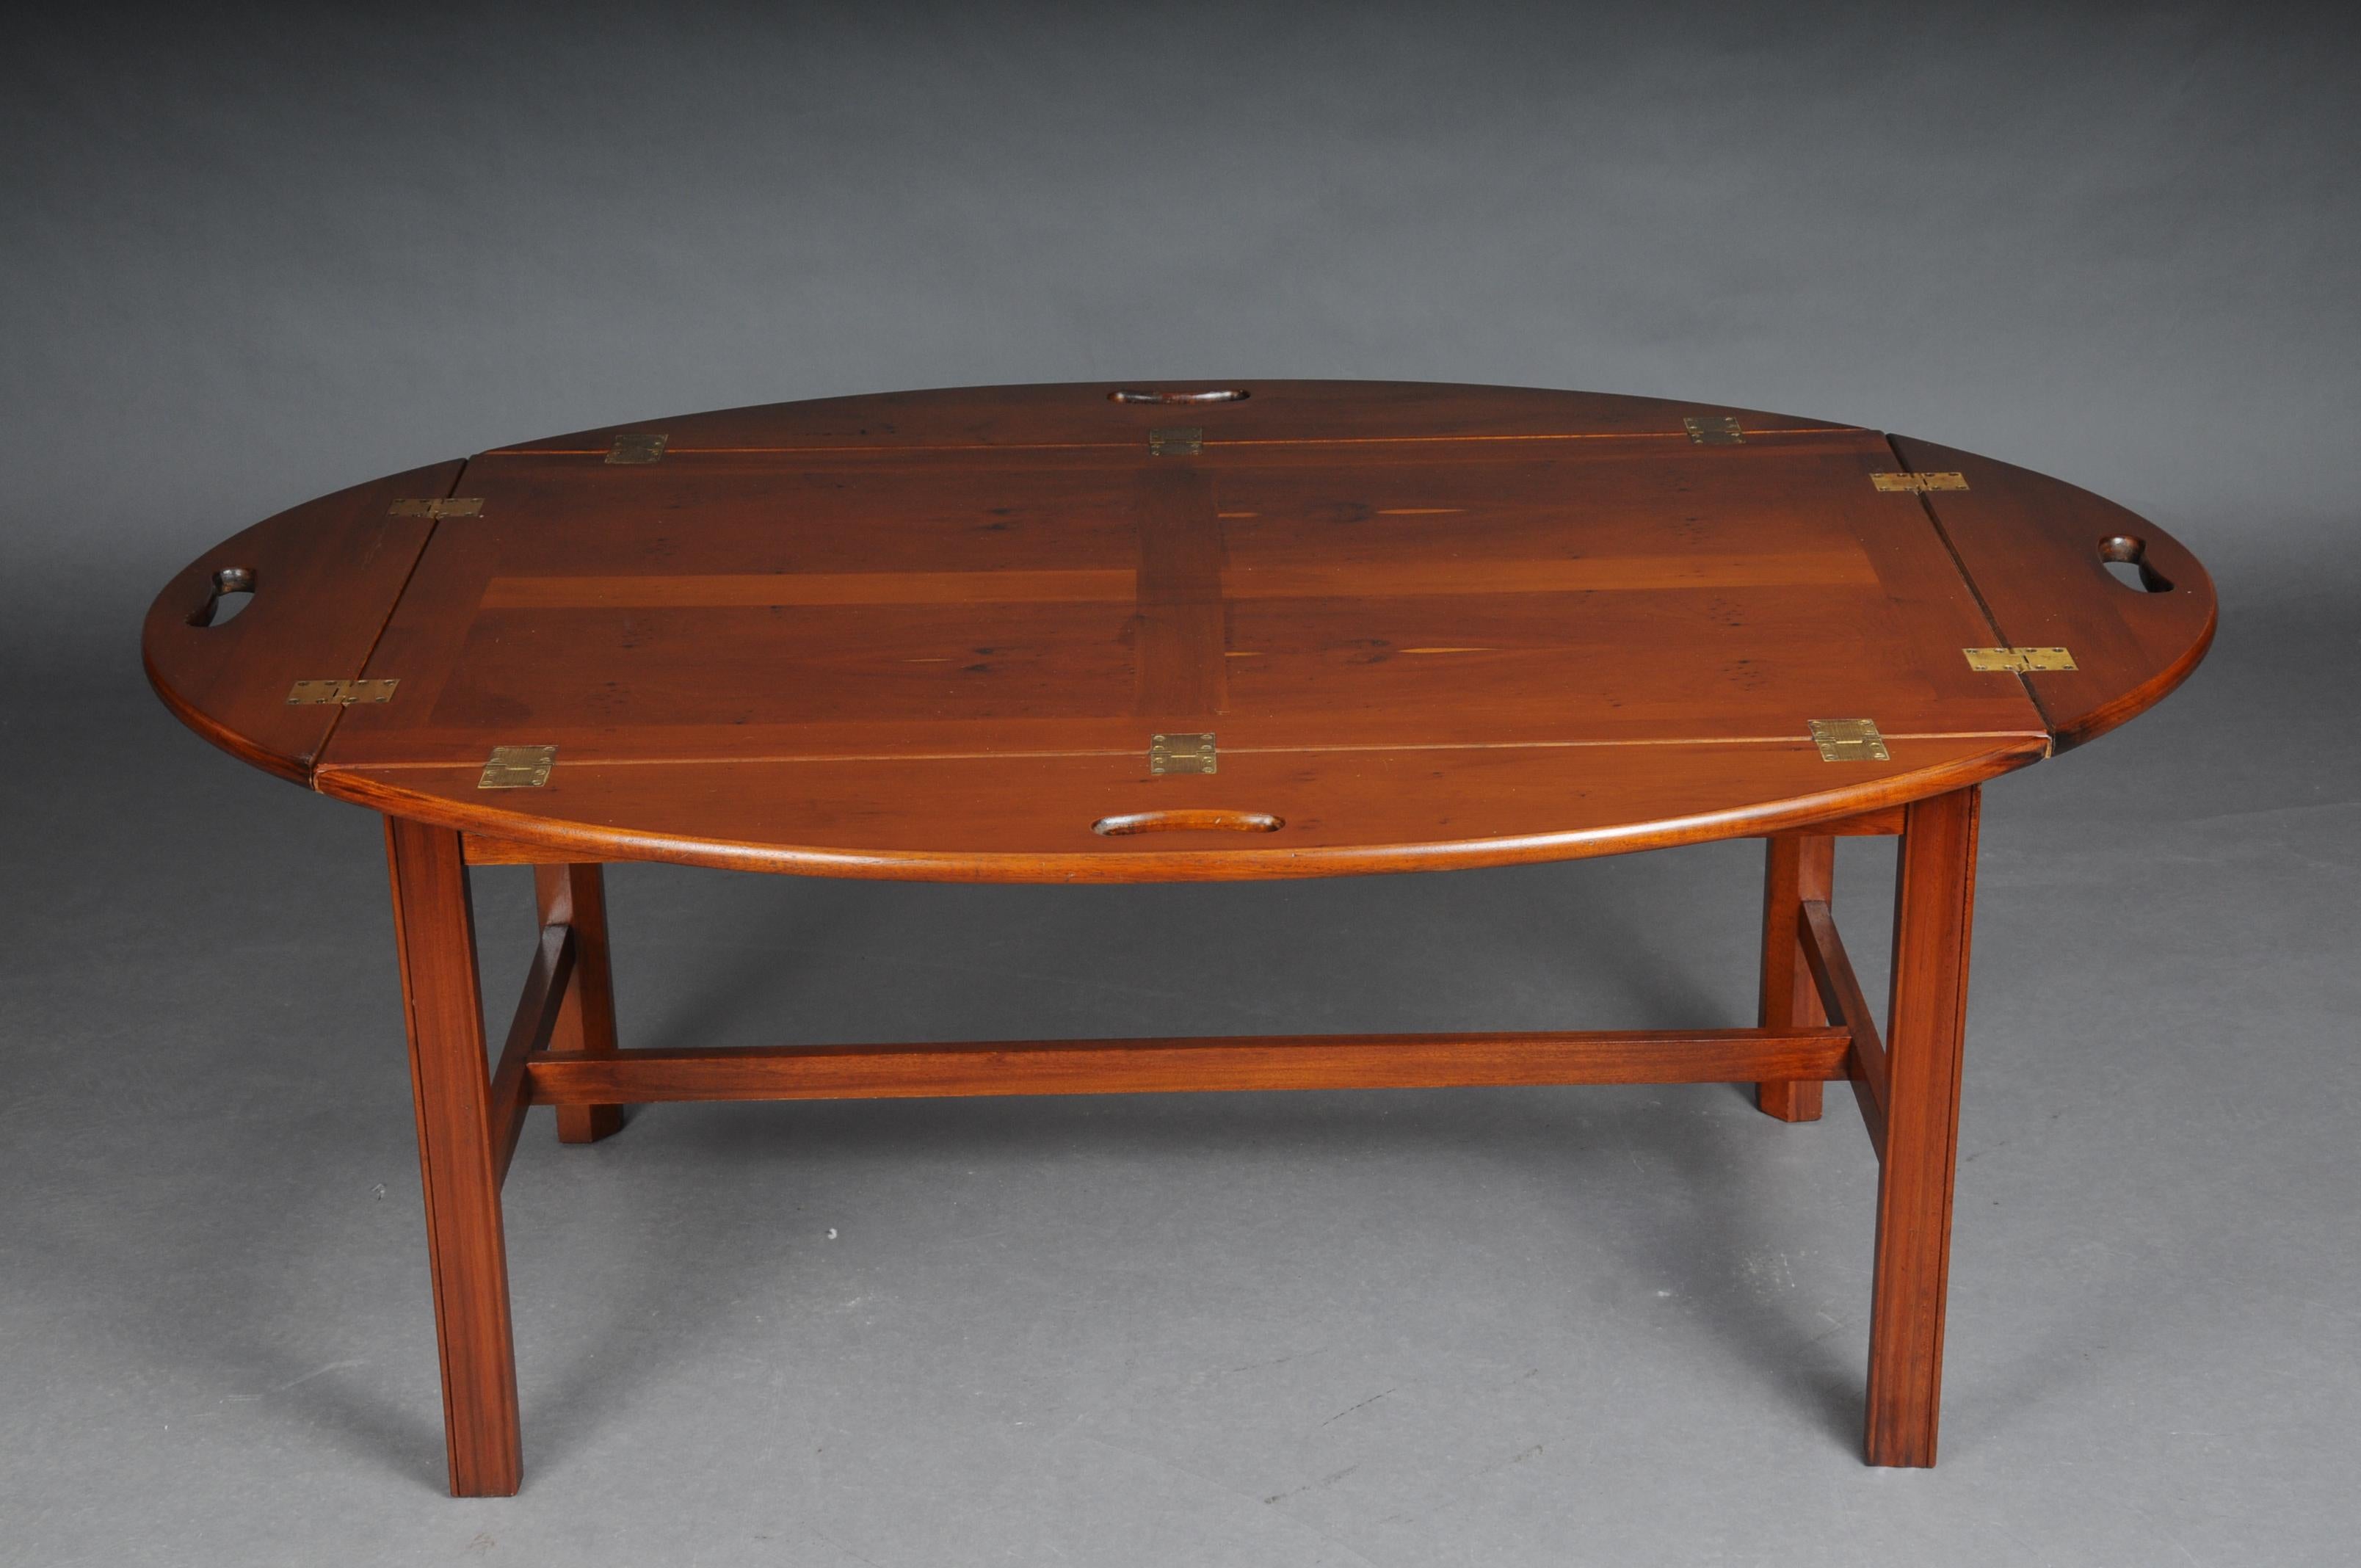 20th Century English Captain's Coffee Table / Table, Yew Tree In Good Condition For Sale In Berlin, DE